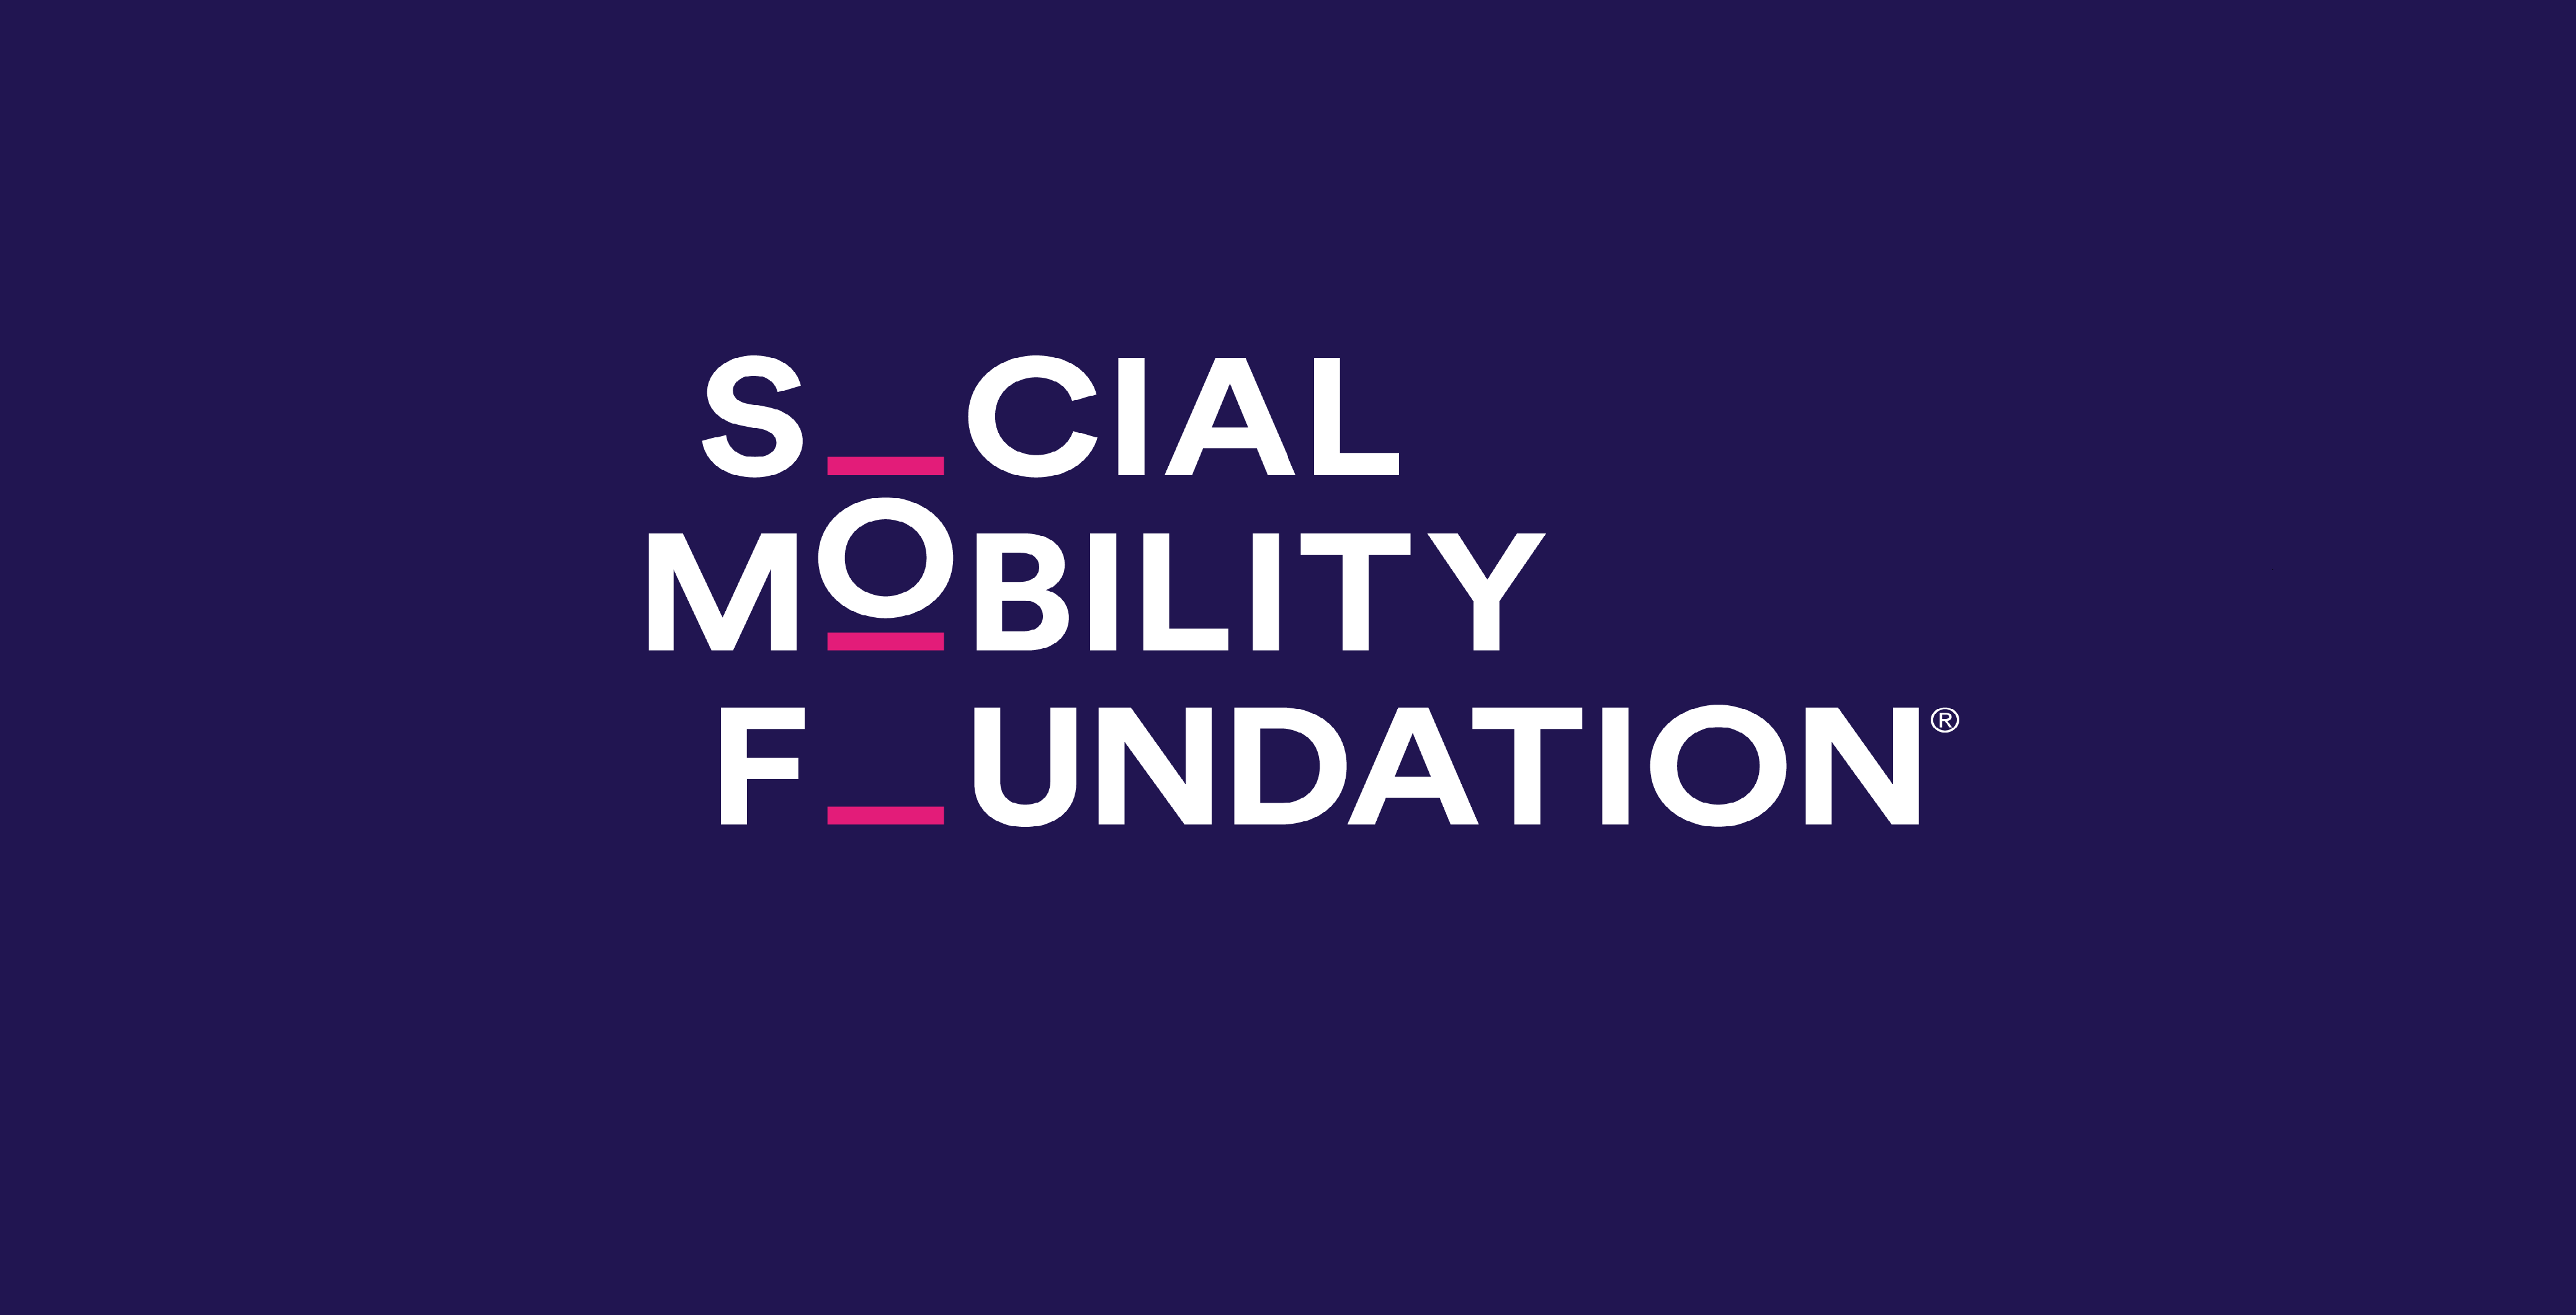 The Social Mobility Foundation